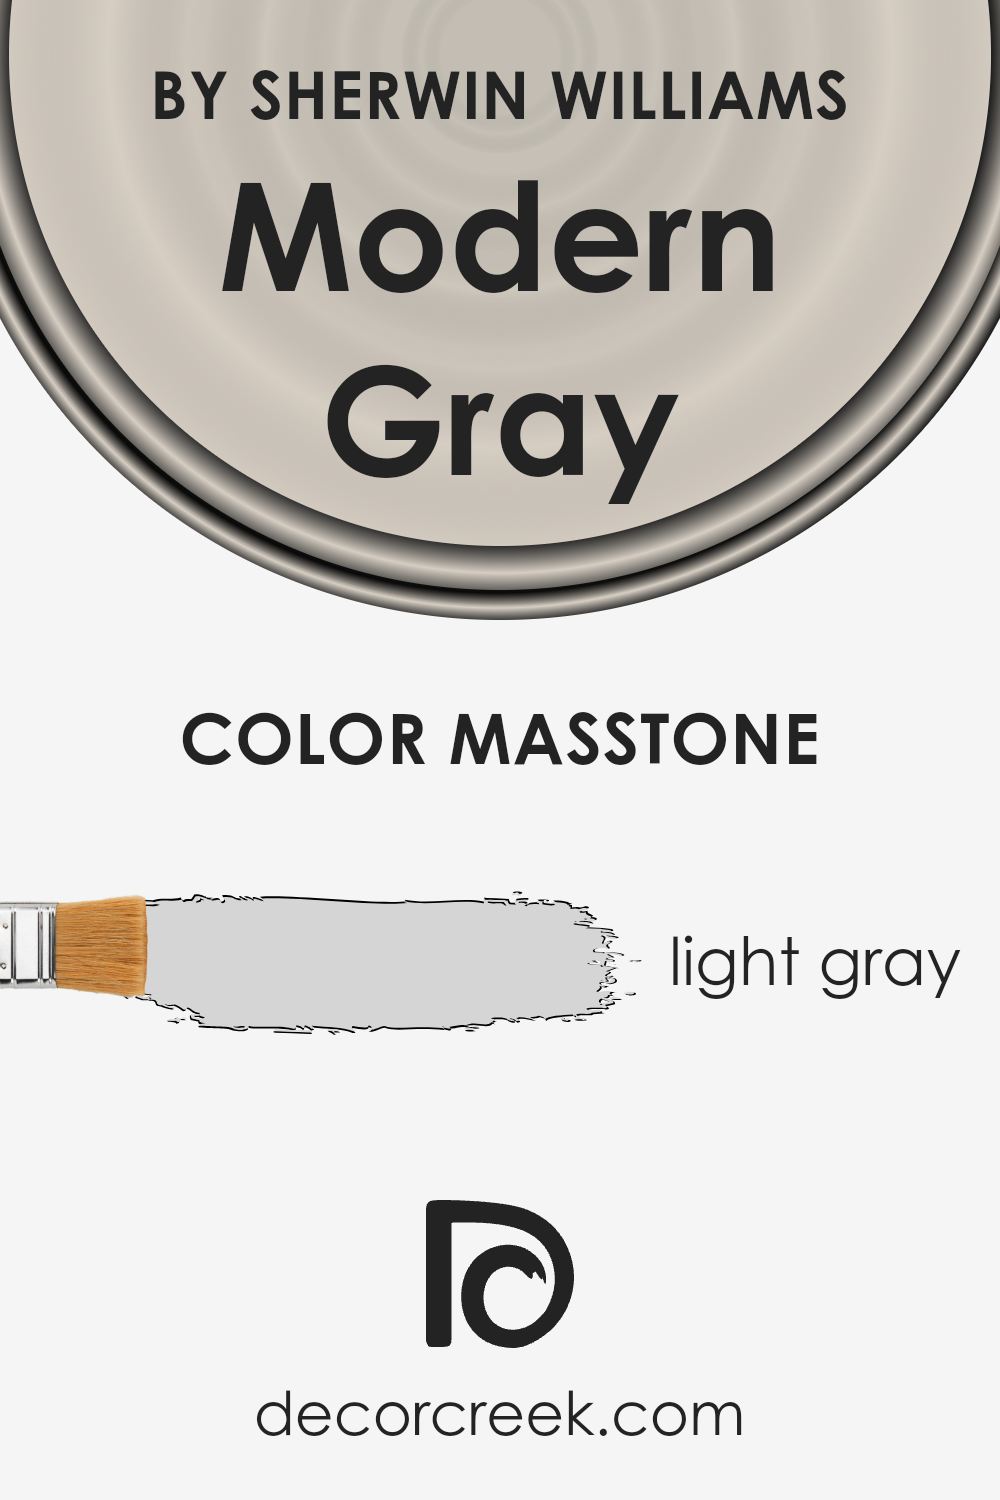 what_is_the_masstone_of_modern_gray_sw_7632